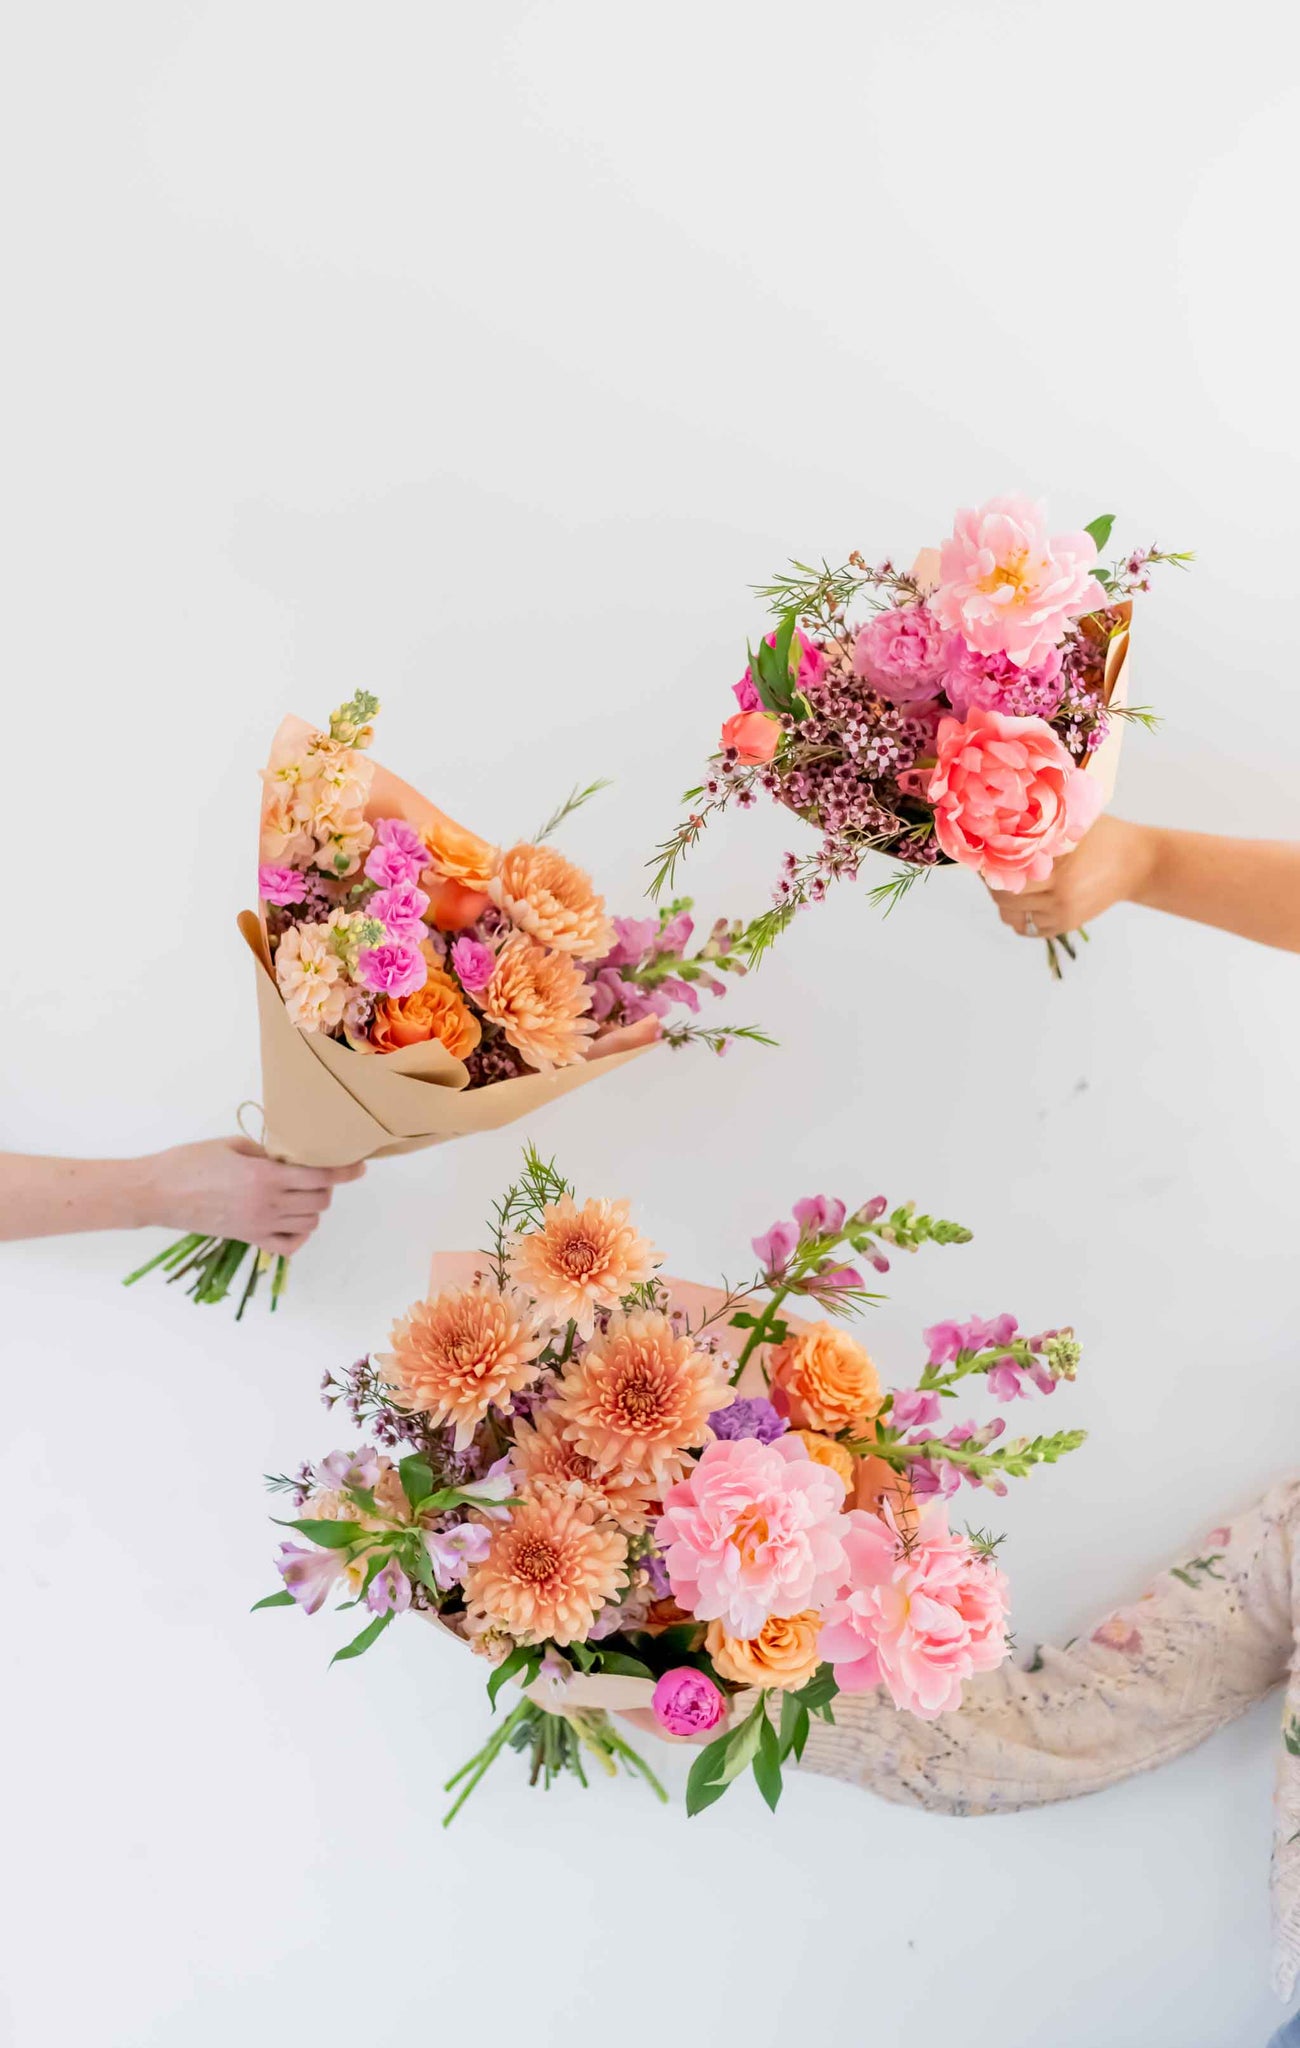 Three Mother’s Day flower bouquets featuring peonies